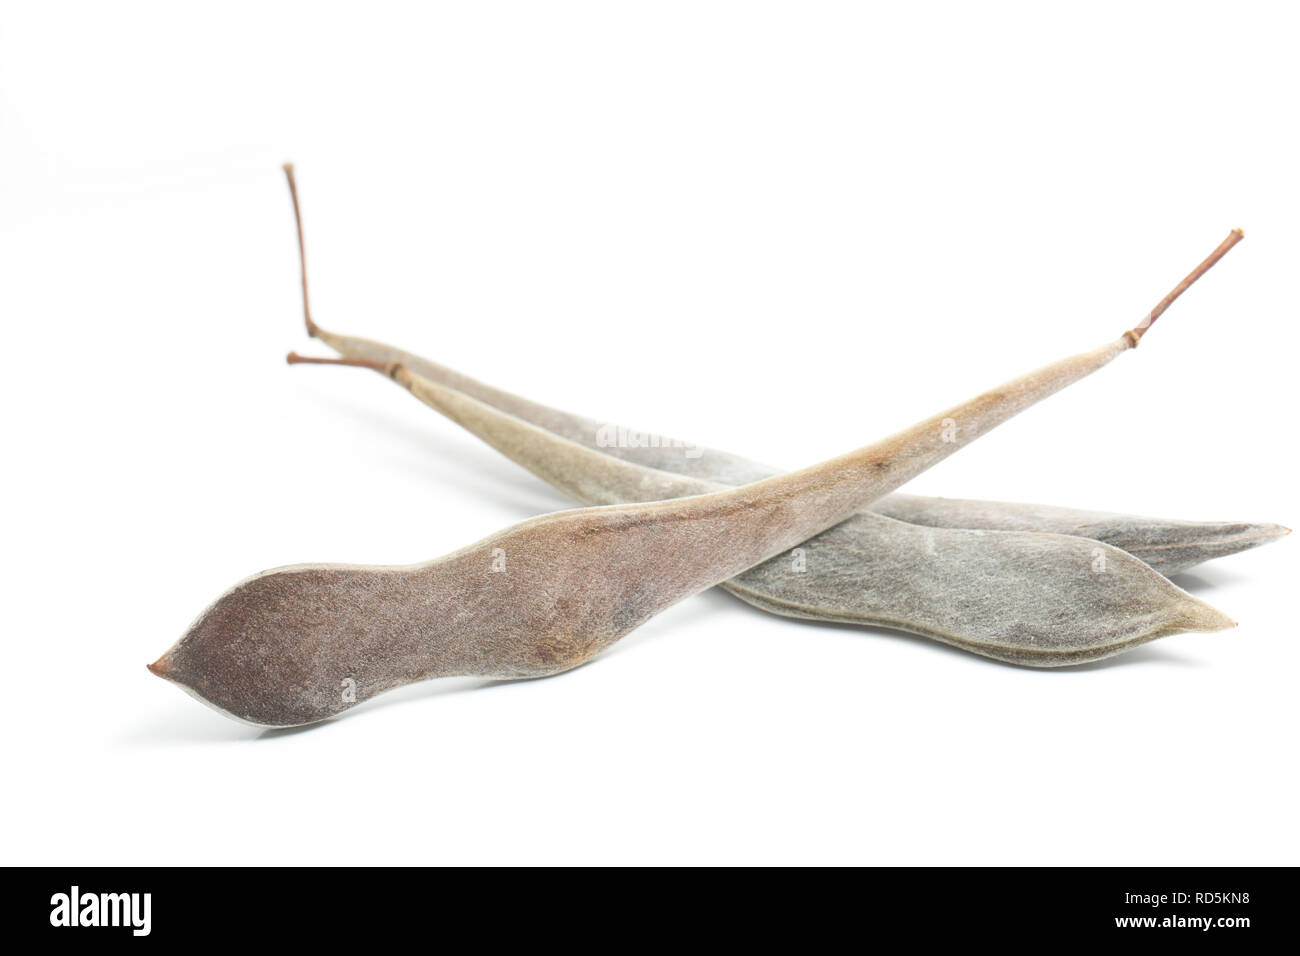 Dry wisteria pods containing the seeds taken from a wisteria plant in north west England UK GB. Photographed on a white background Stock Photo